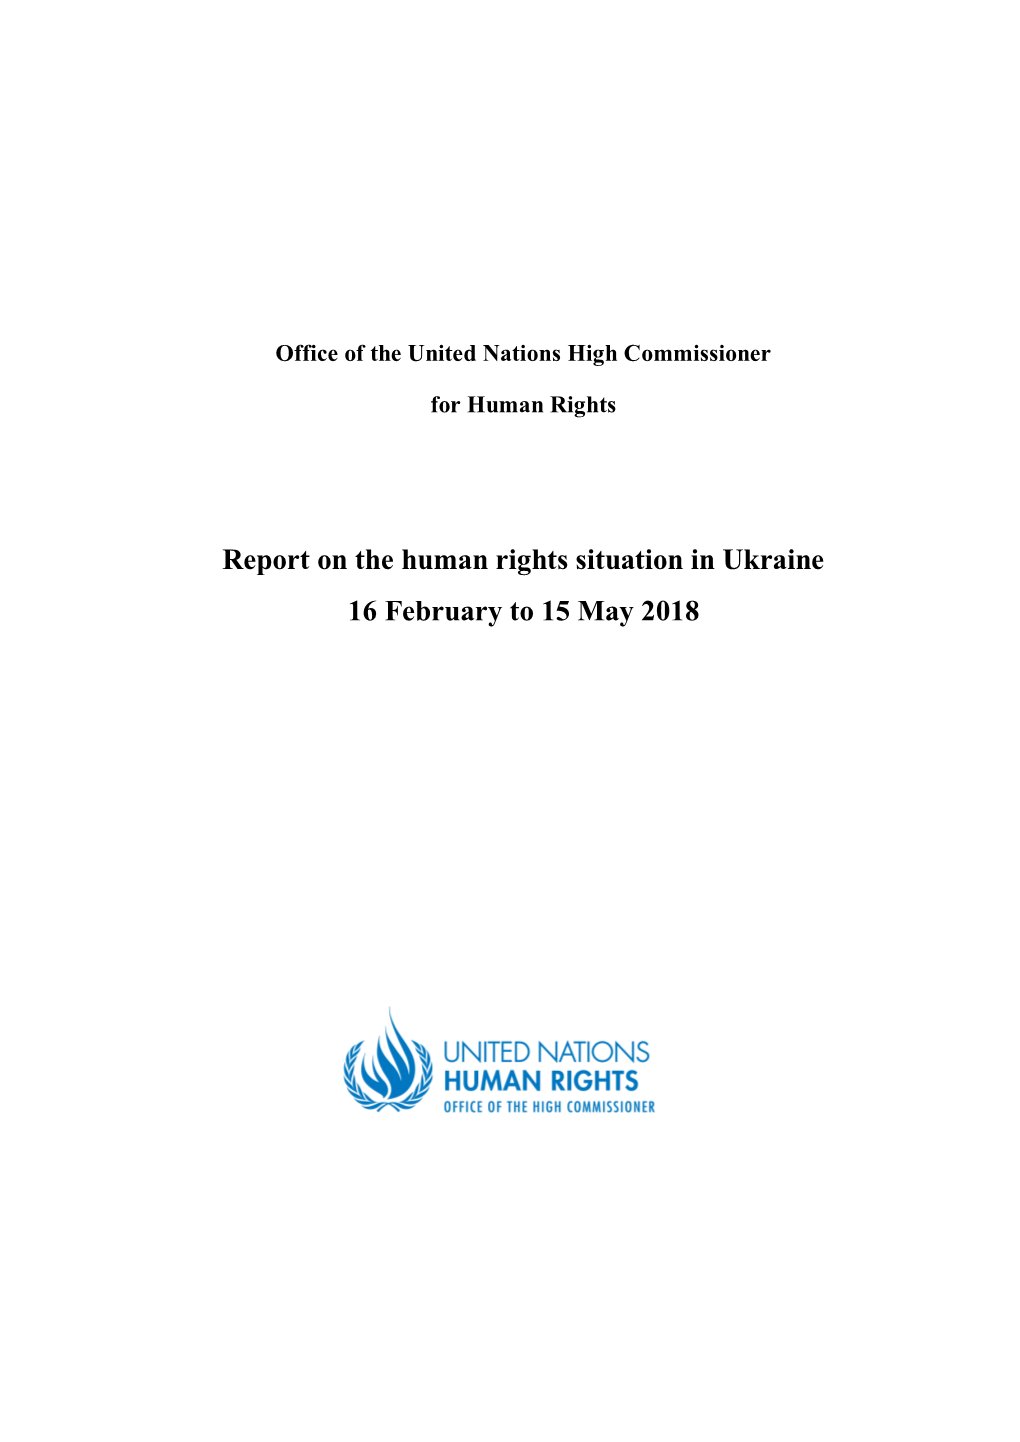 Report on the Human Rights Situation in Ukraine 16 February to 15 May